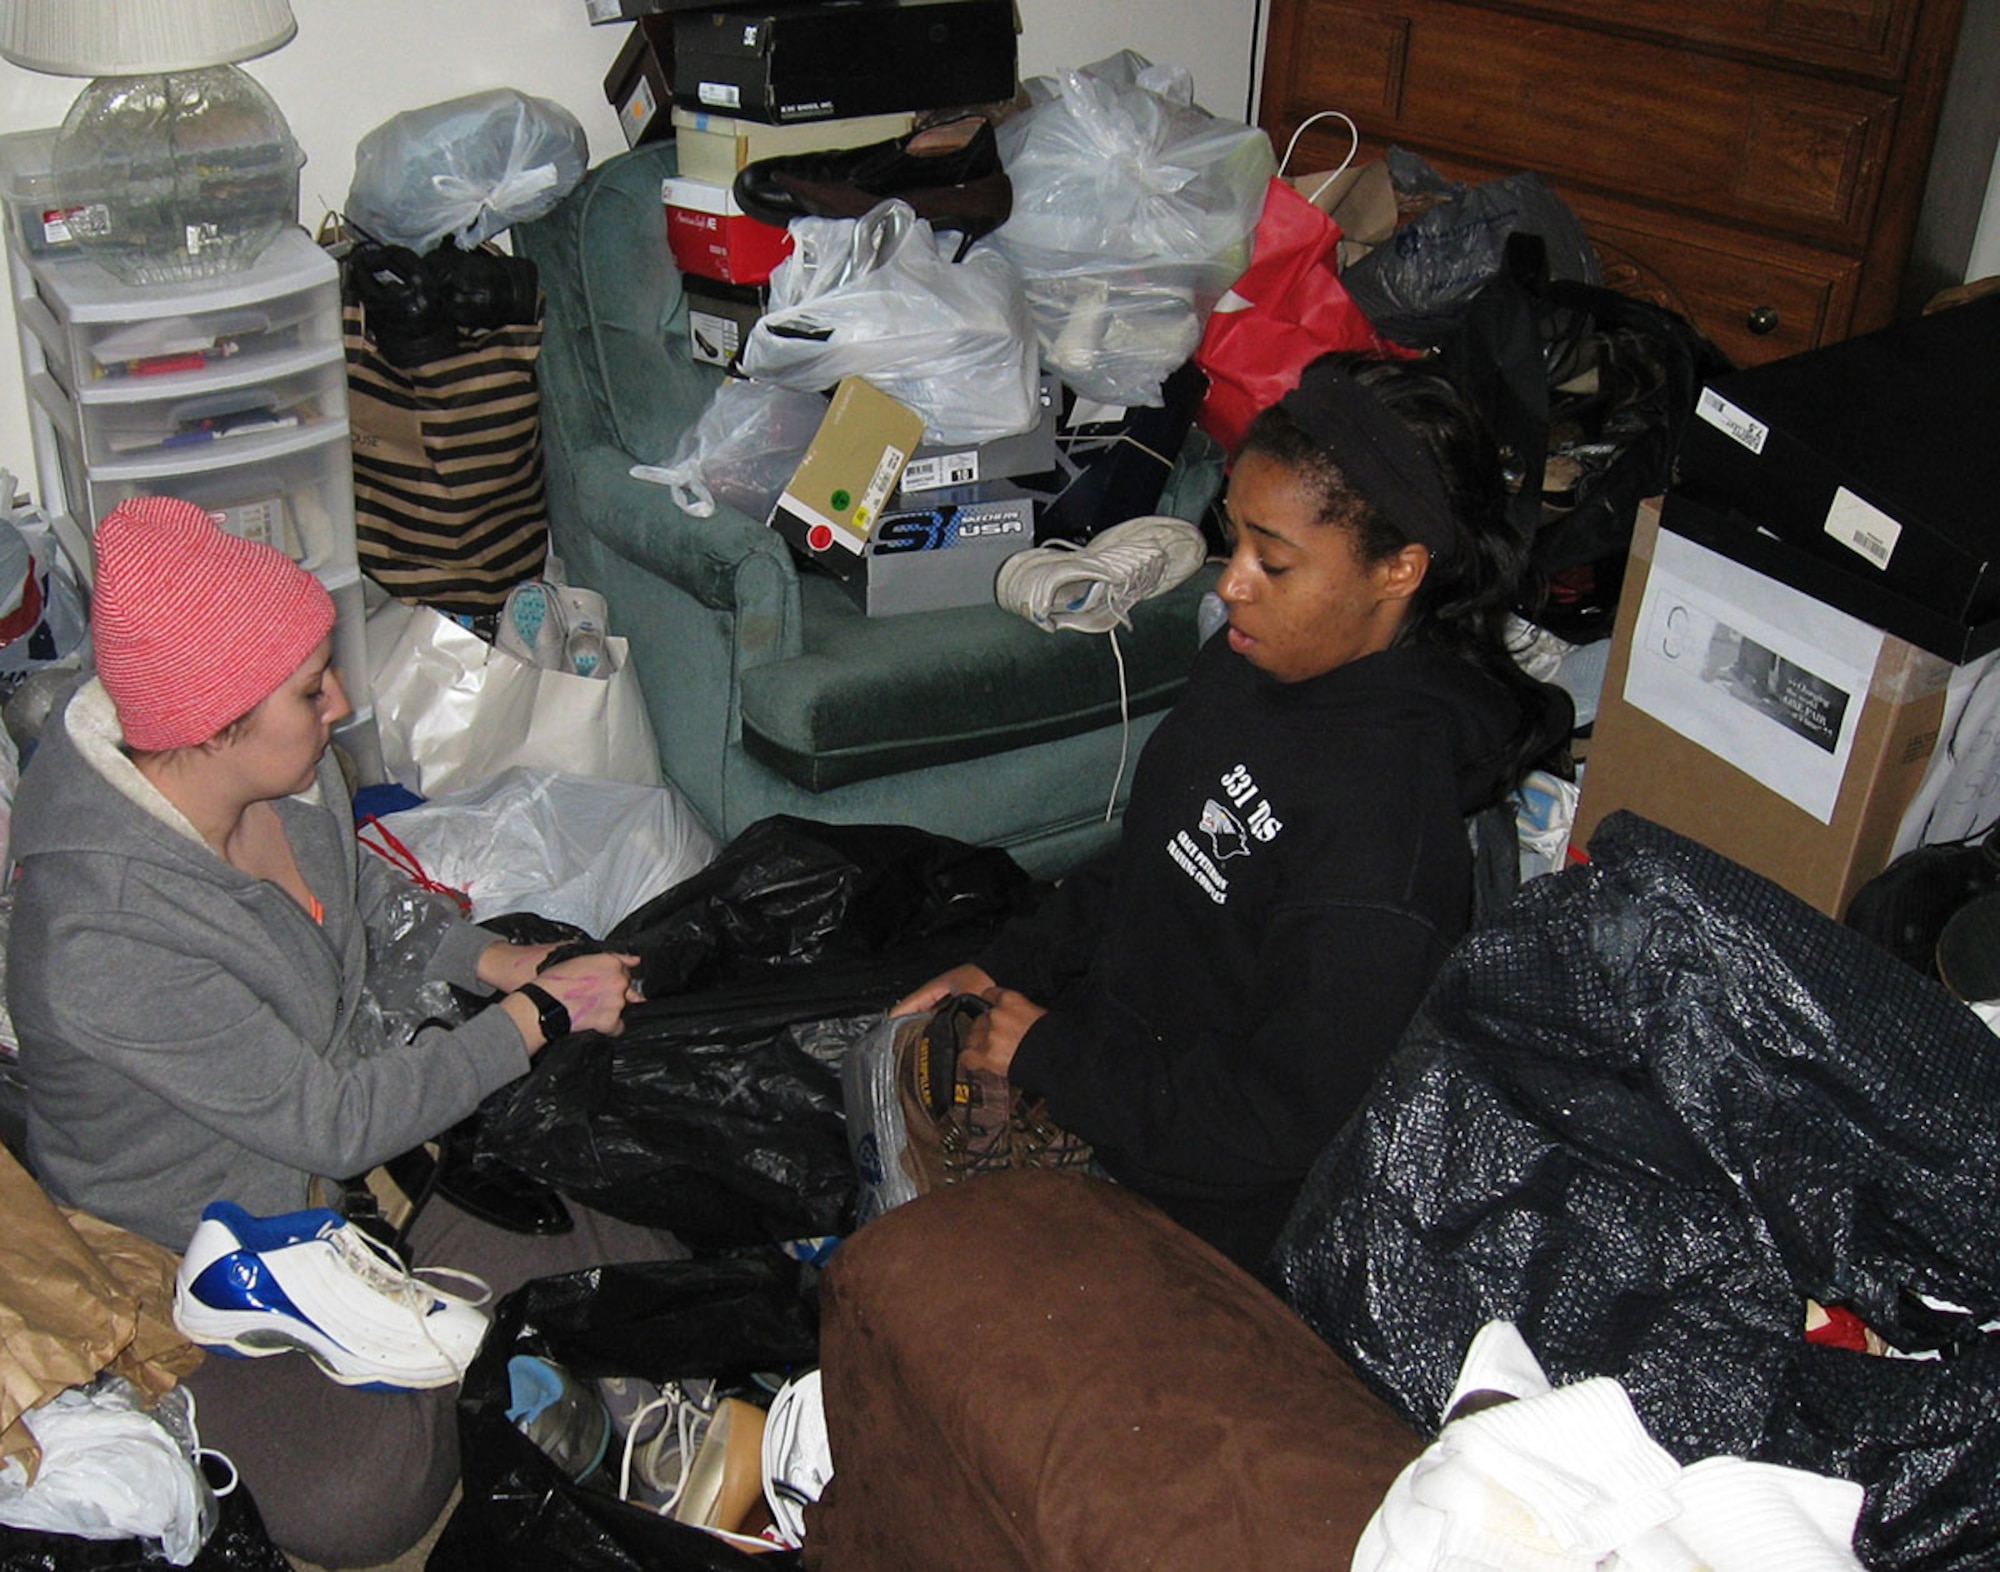 A1Cs Bethany Baines left and Jalynn Wilford both from the 88 Force Support Squadron sit on the bedroom floor surrounded by donated shoes that had to be match and bagged for the Soles4Souls drive. (photo by Ted Theopolos)